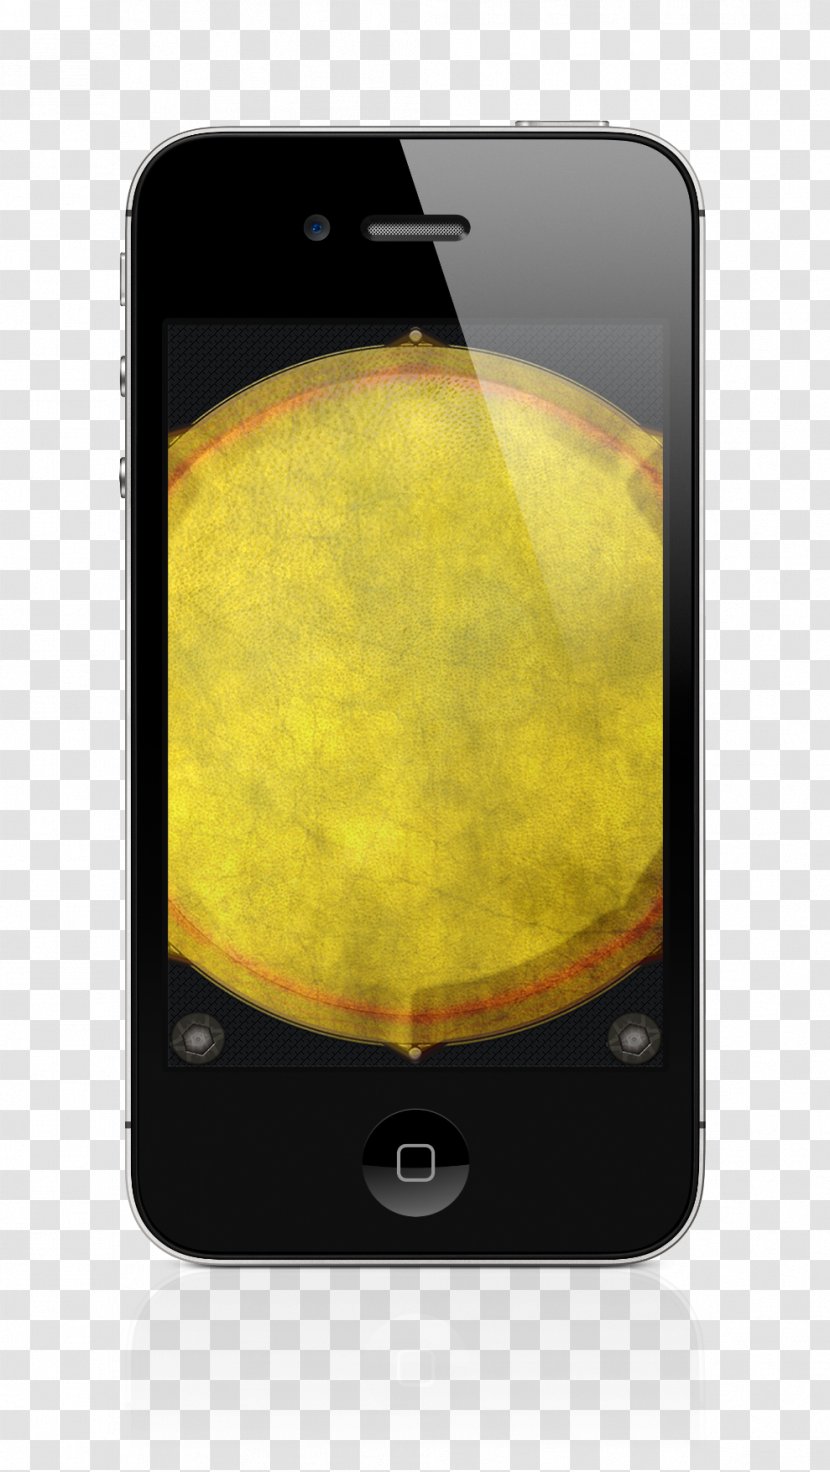 IPhone 4S Apple 6 5s - Gadget - Djembe Transparent PNG